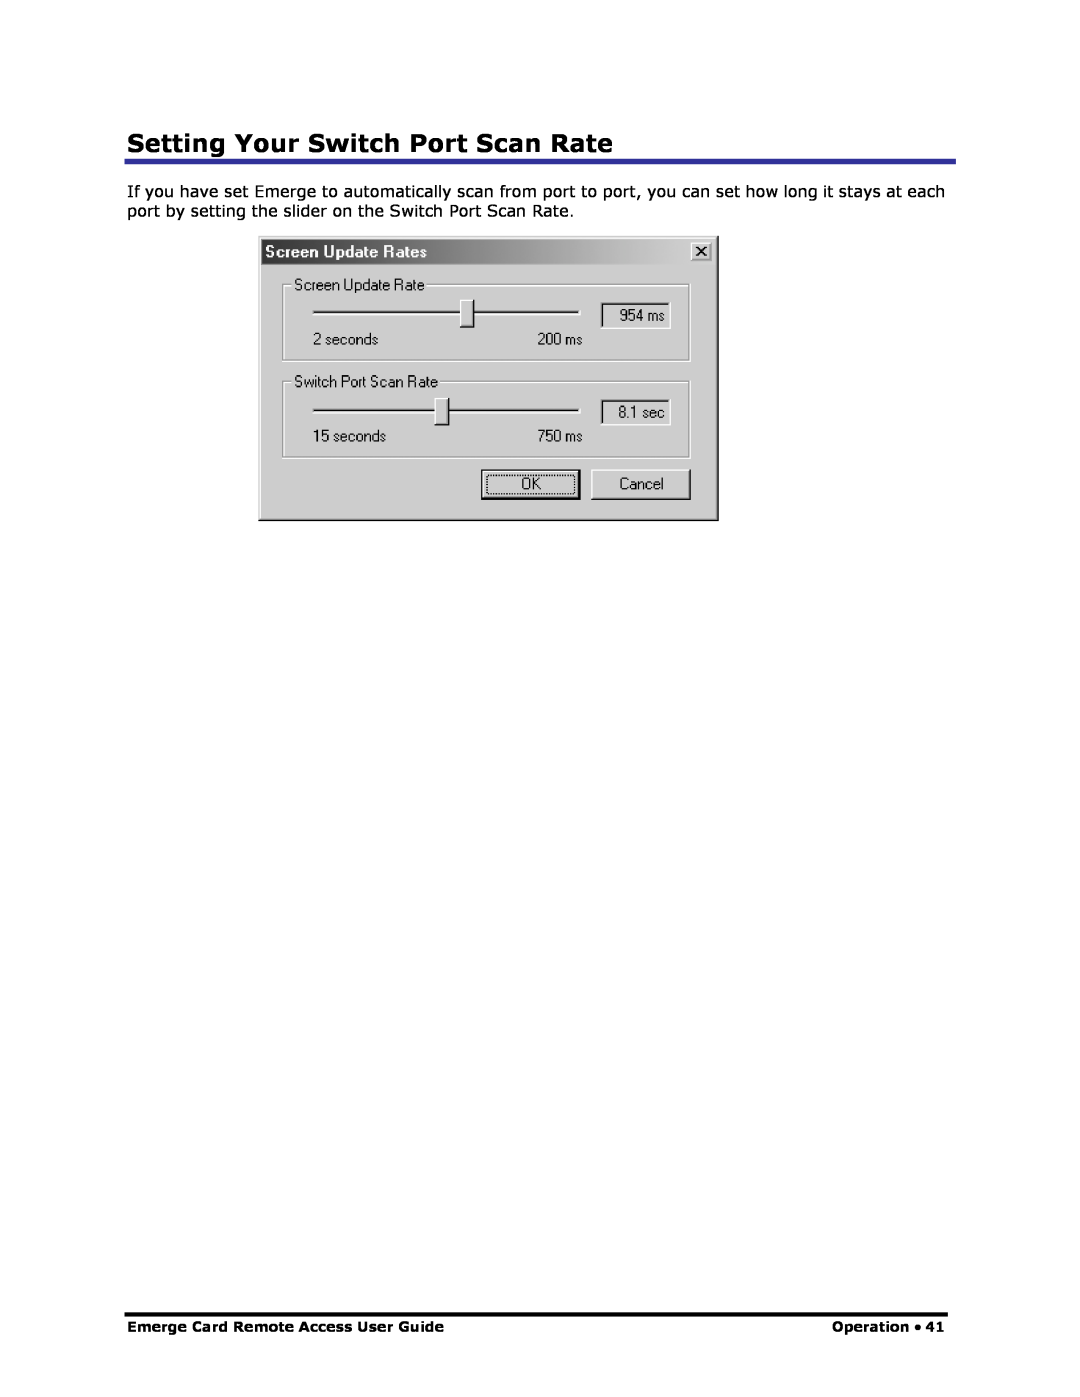 Apex Digital Apex EmergeCard Remote Access manual Setting Your Switch Port Scan Rate, Operation 